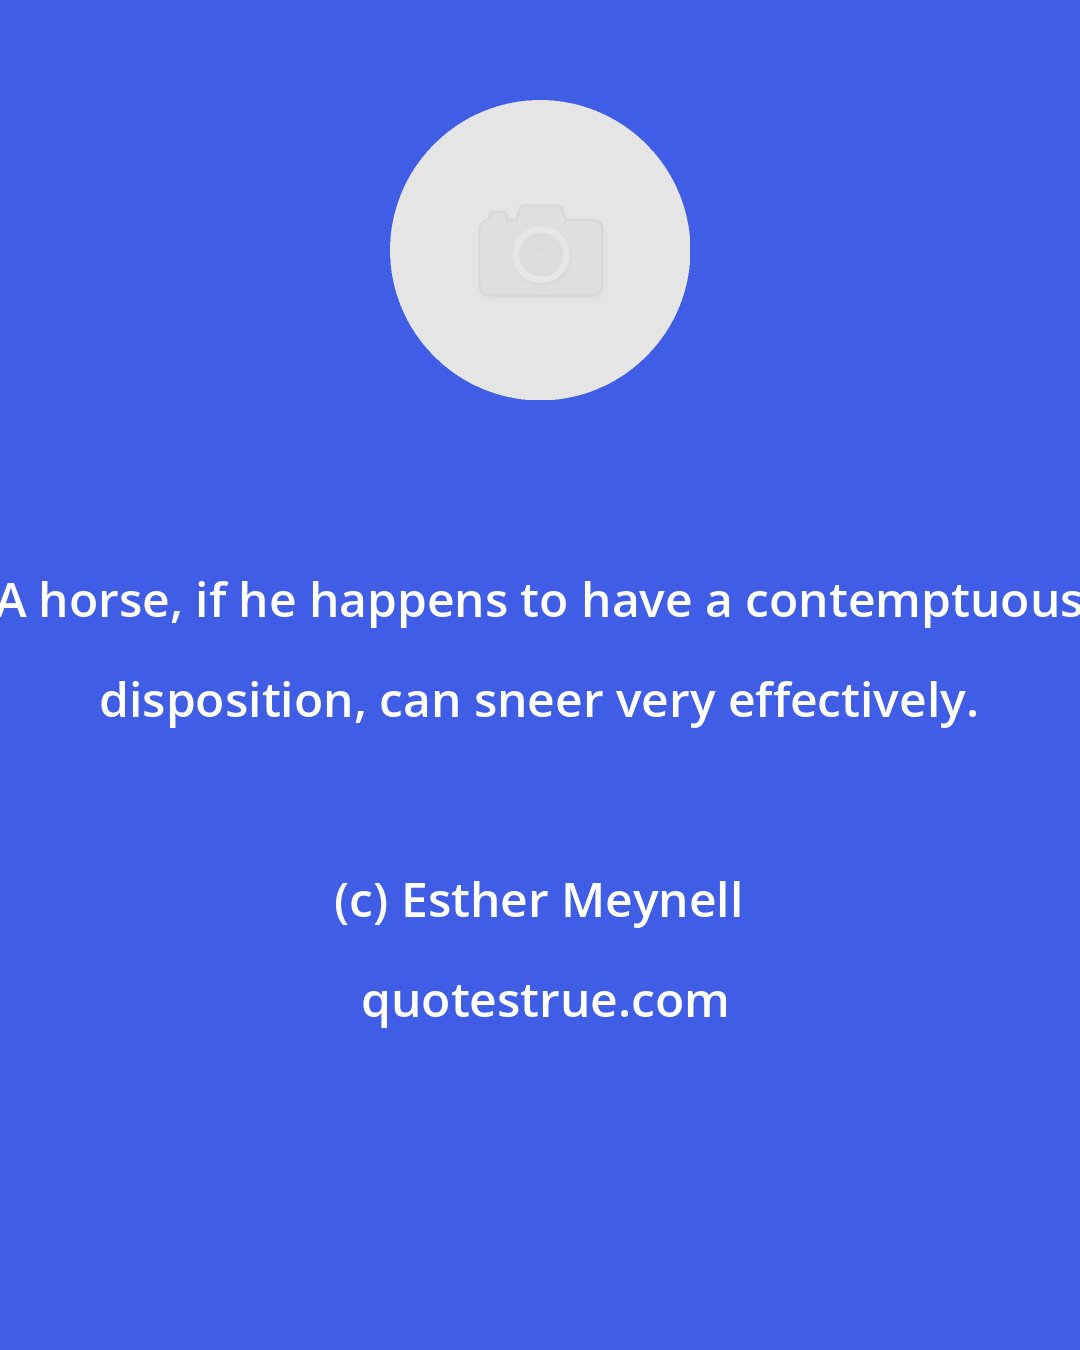 Esther Meynell: A horse, if he happens to have a contemptuous disposition, can sneer very effectively.